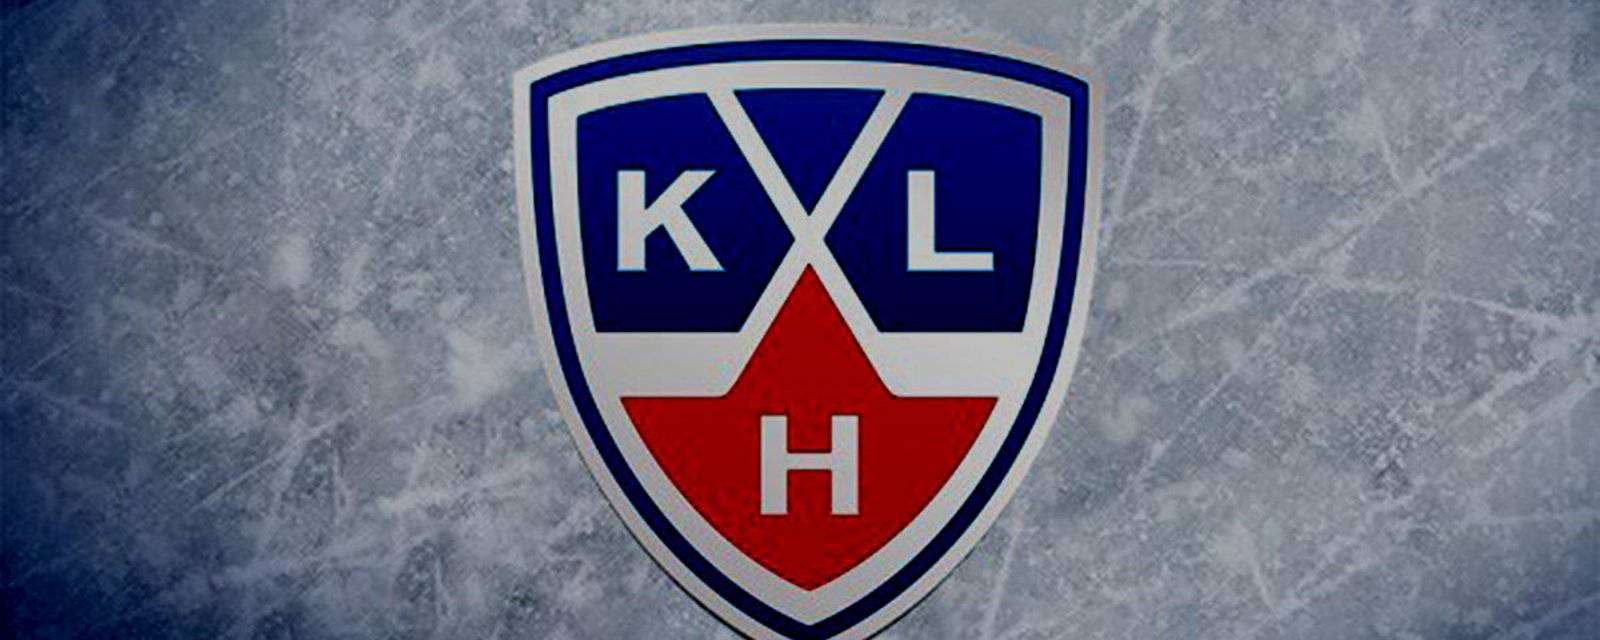 The KHL are facing another major problem!